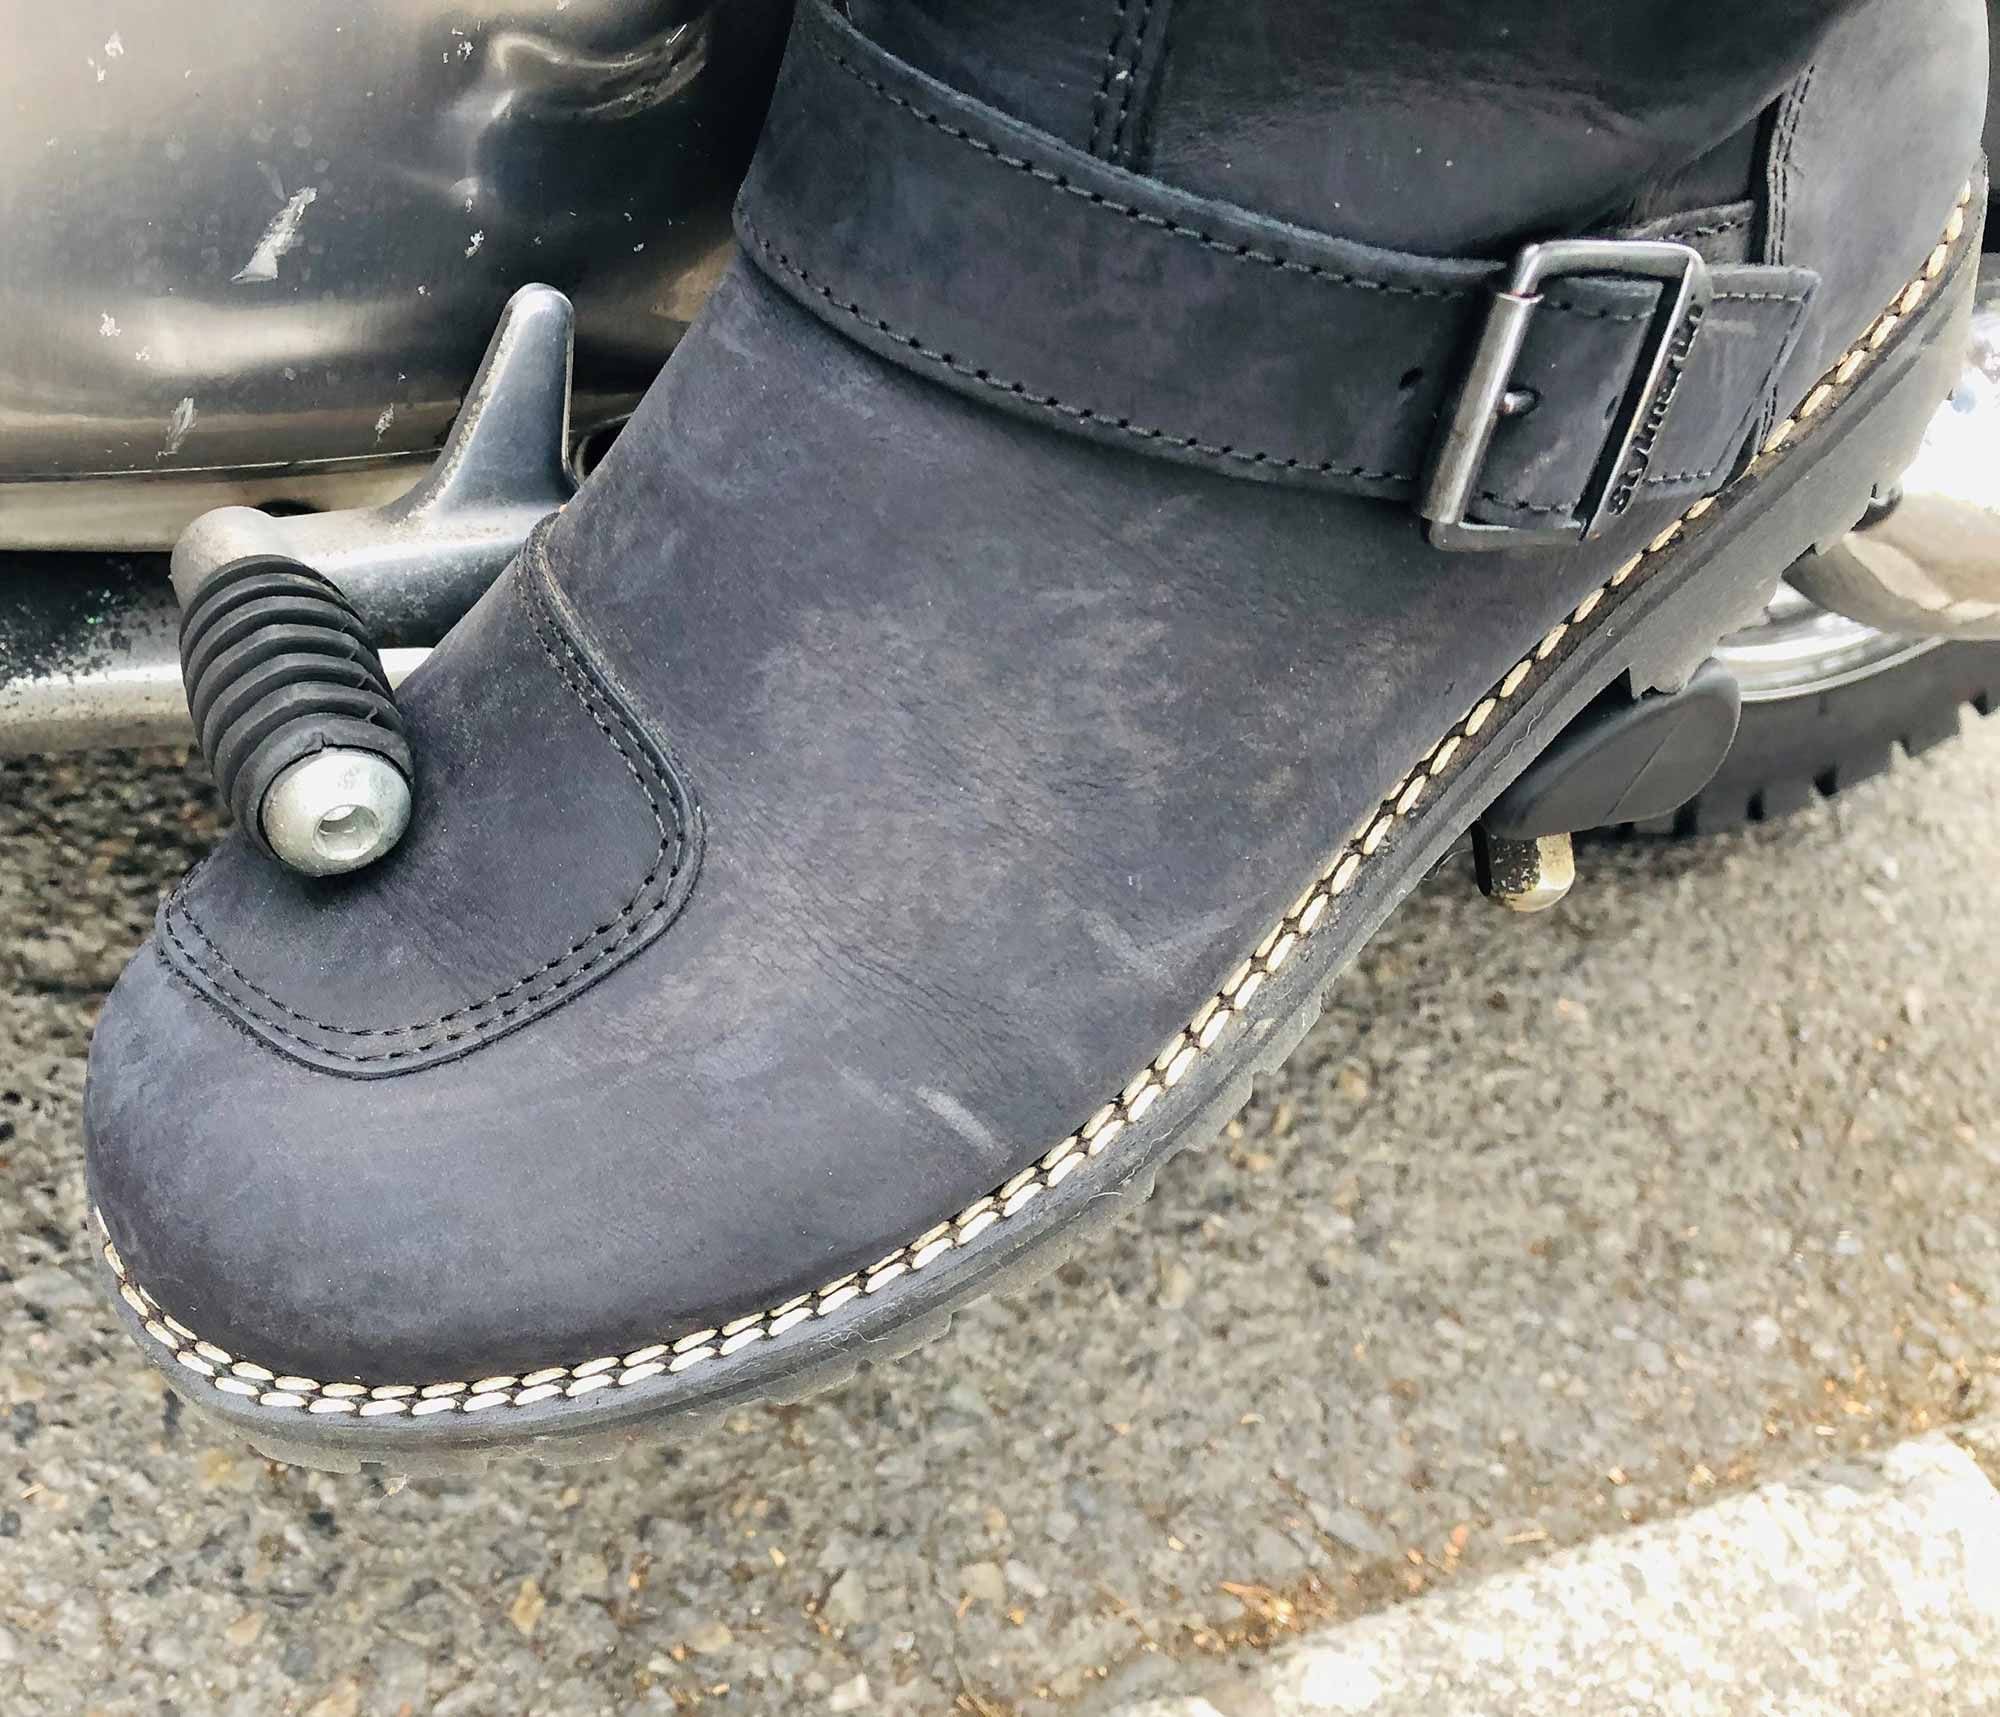 The low-profile toe box slides easily under a shift lever, even with added leather toe patch up top.